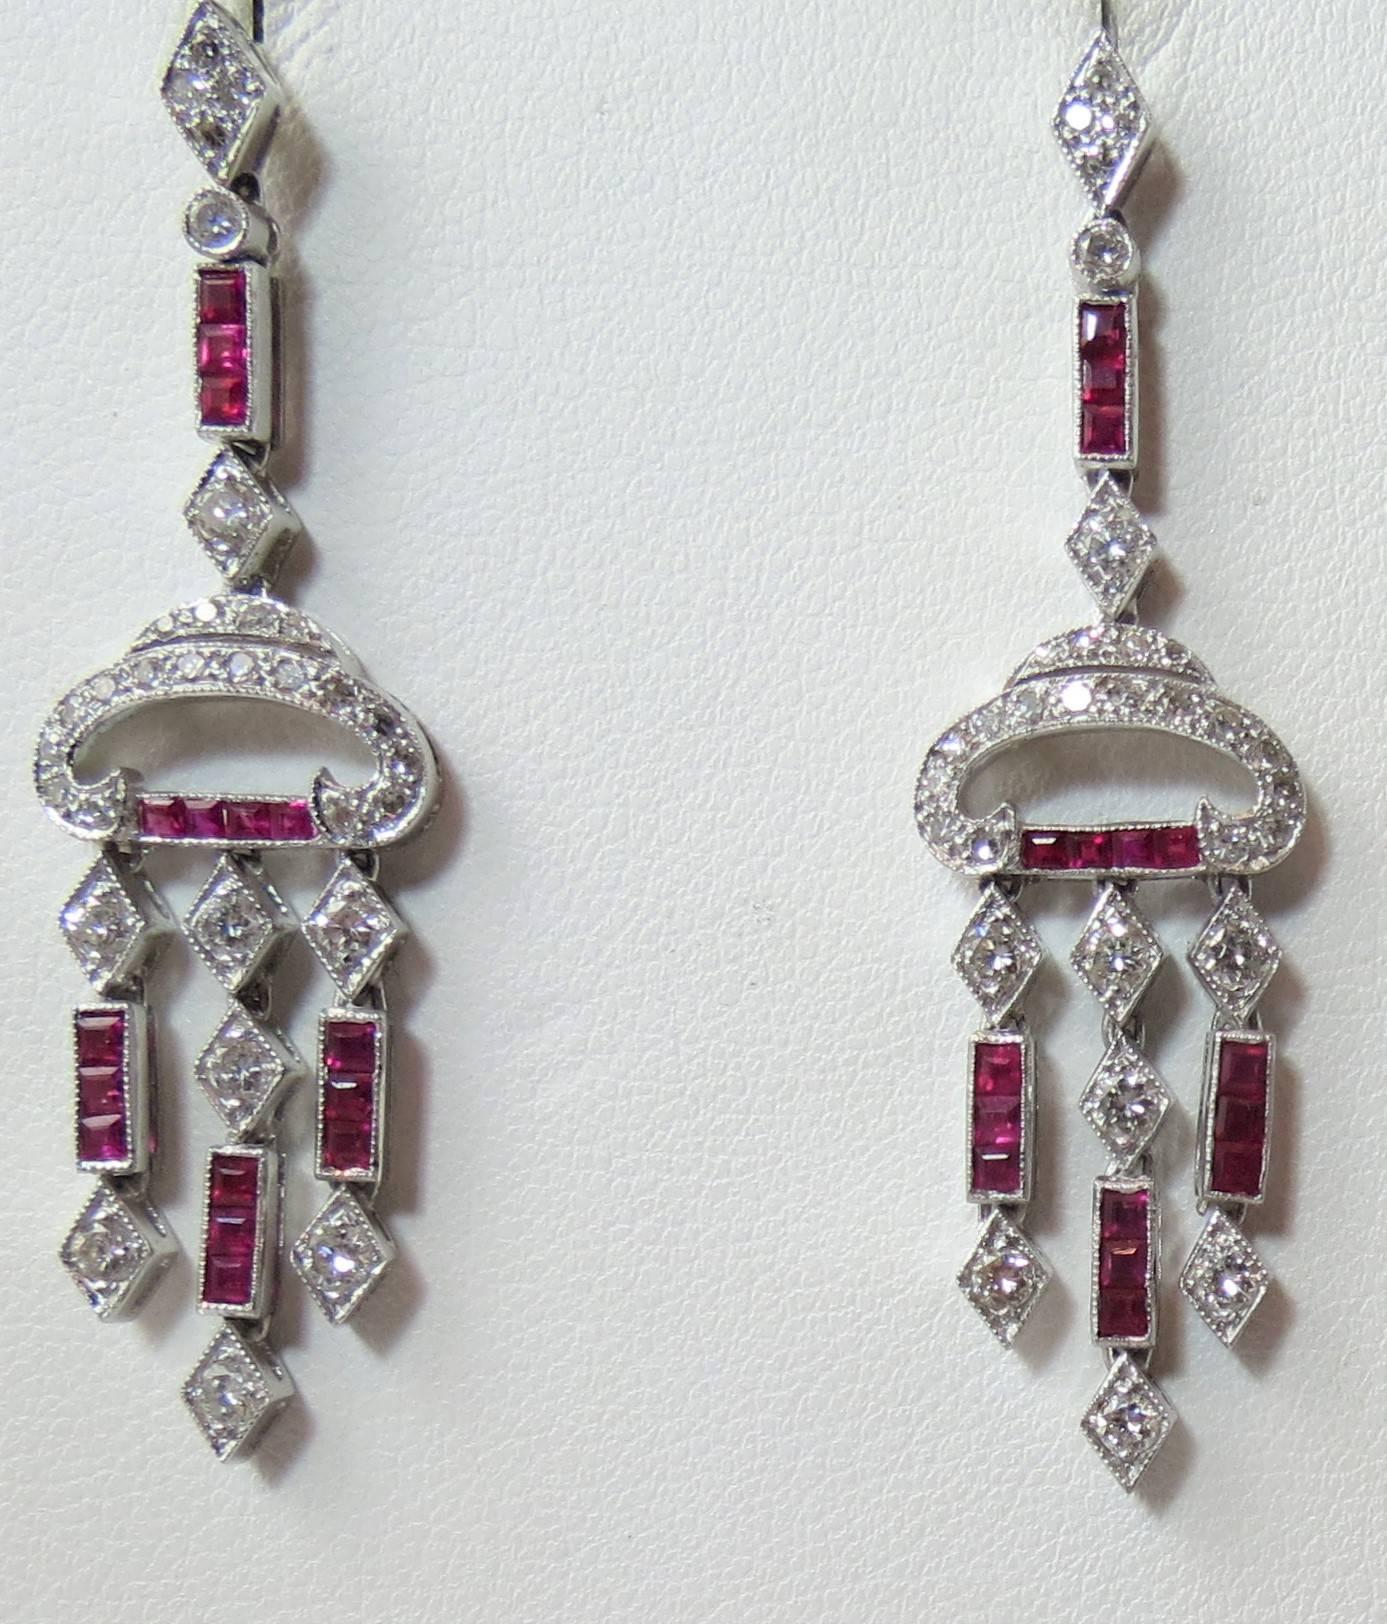 Vintage style 18K white gold diamond and ruby drop earrings, set with 32 square cut rubys weighing about 1.20cts, and 18 round full cut diamonds weighing about .75cts and 44 single cut diamonds weighing about .50cts.

